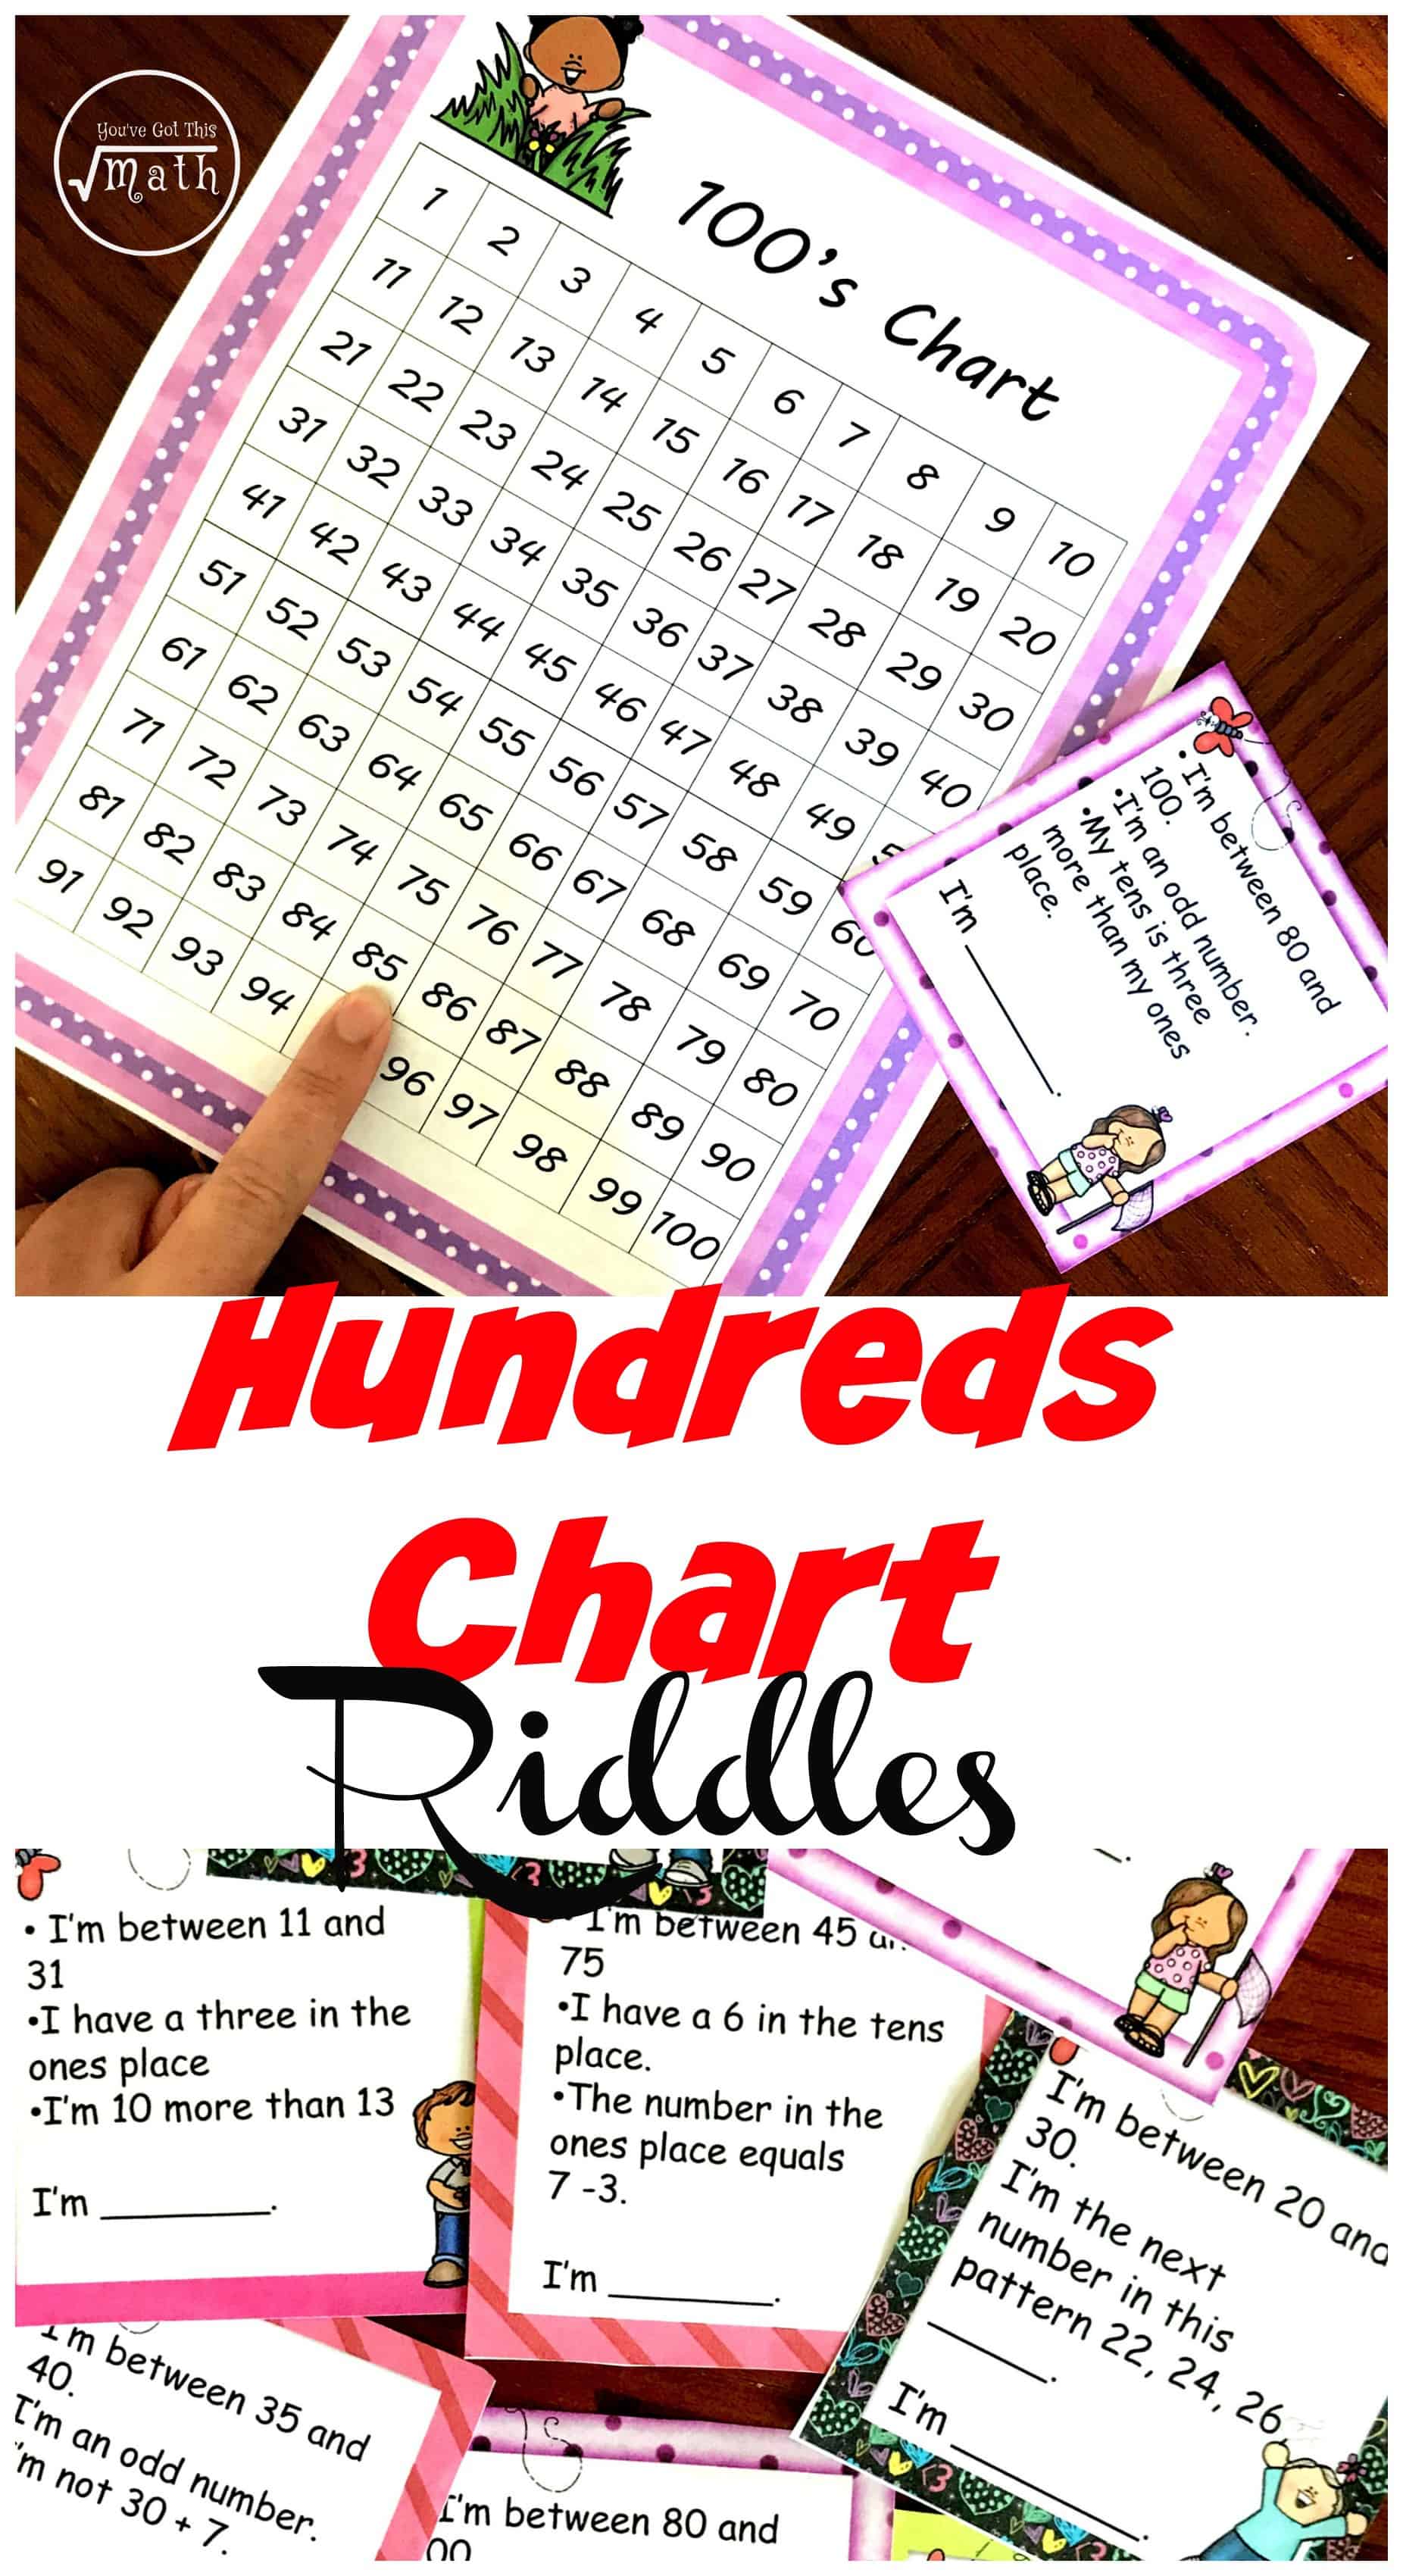 Playing on the hundreds chart builds number and place value sense. These hundreds chart riddles are a fun way for children to explore hundred chart and review math vocabulary words like even and odd.